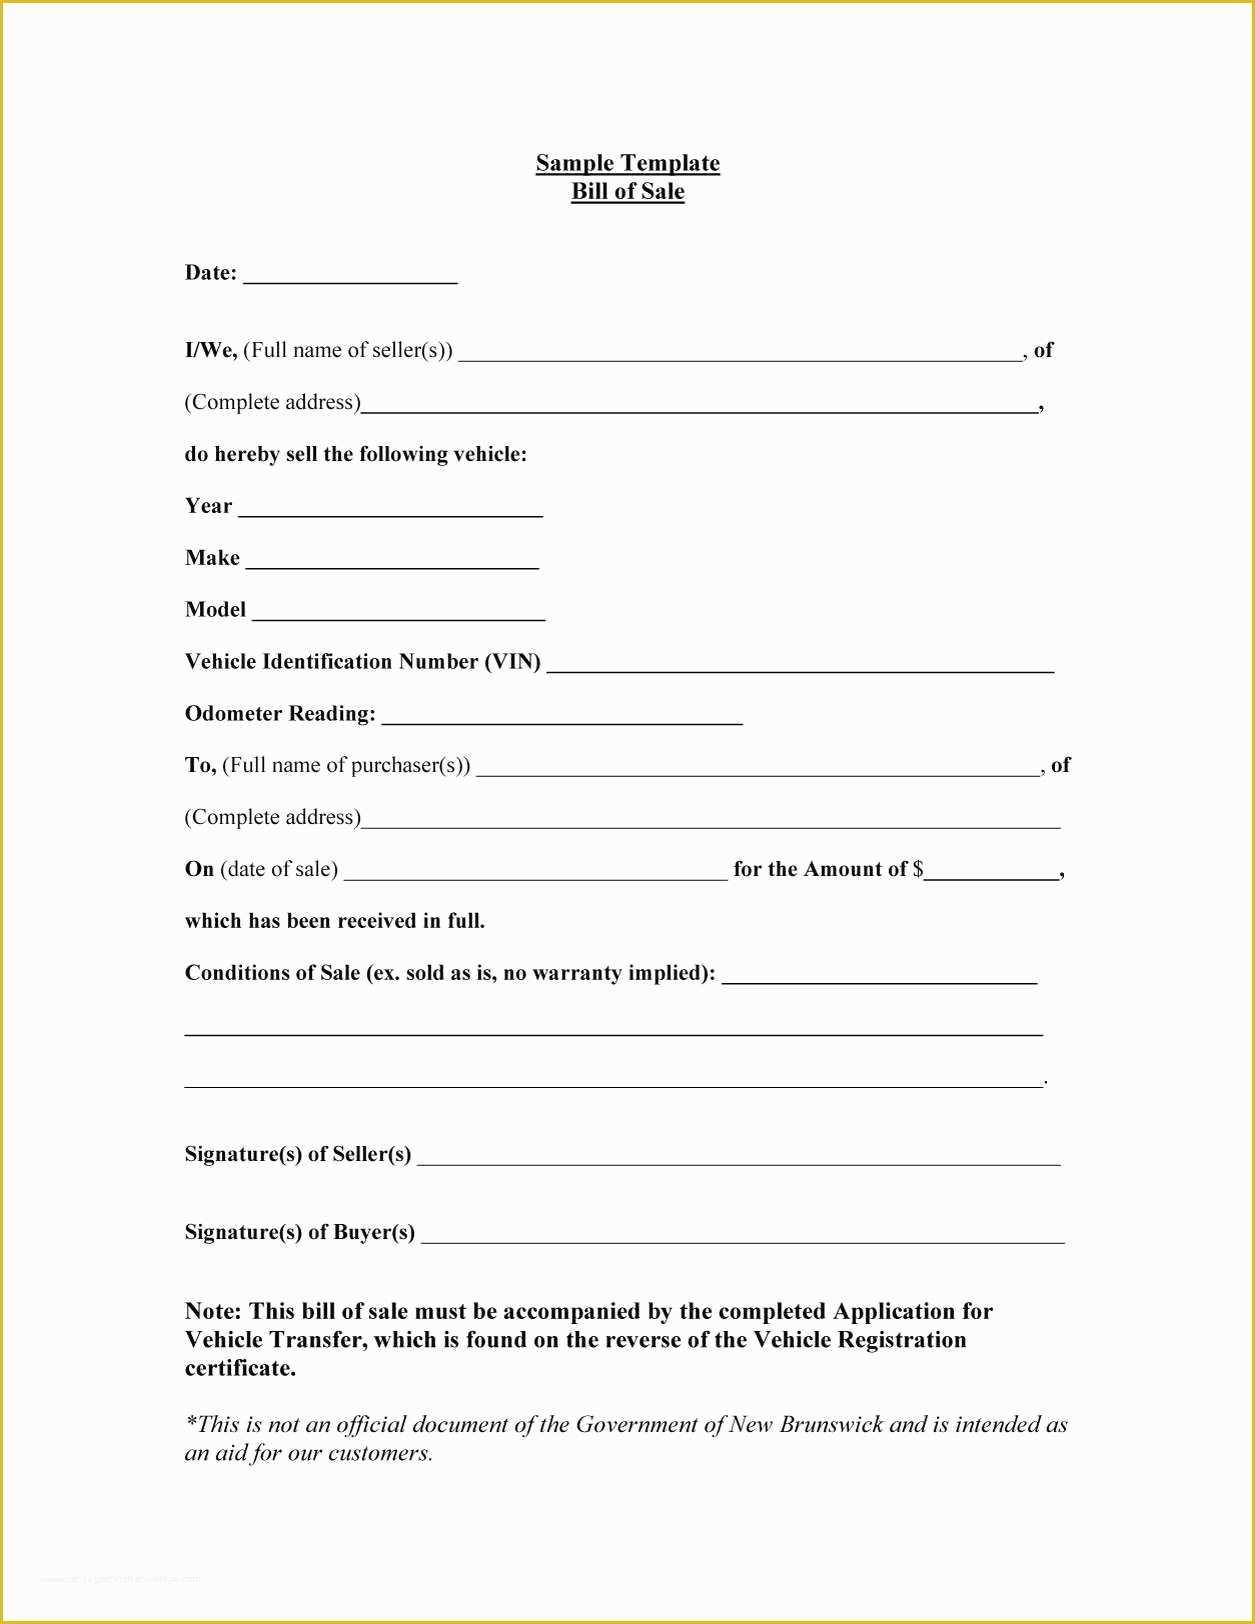 Free Bill Of Sale Template Download Of 46 Fee Printable Bill Of Sale Templates Car Boat Gun